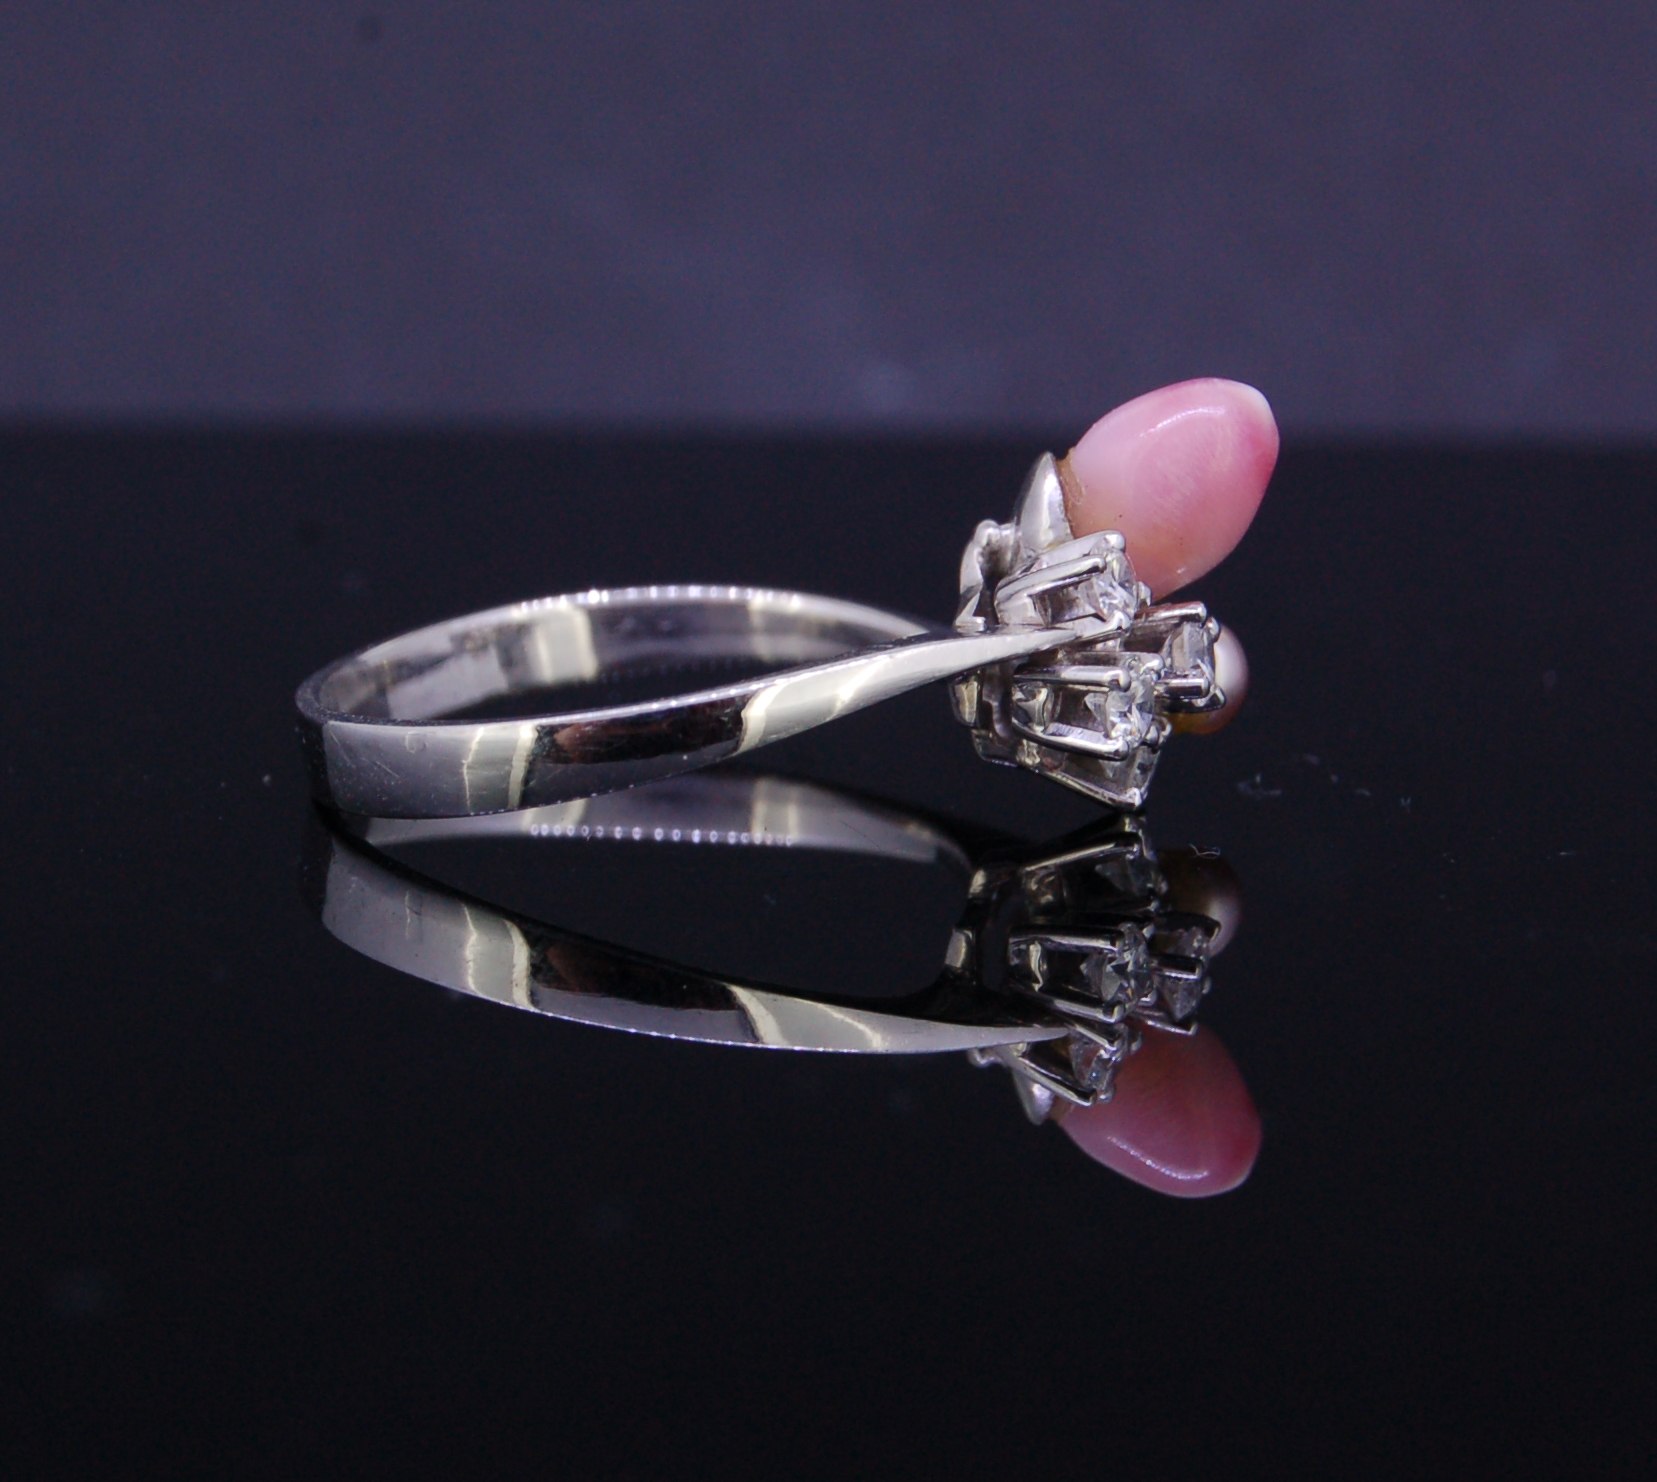 BLACK PEARL, CONCH PEARL AND DIAMOND RING - Image 3 of 3